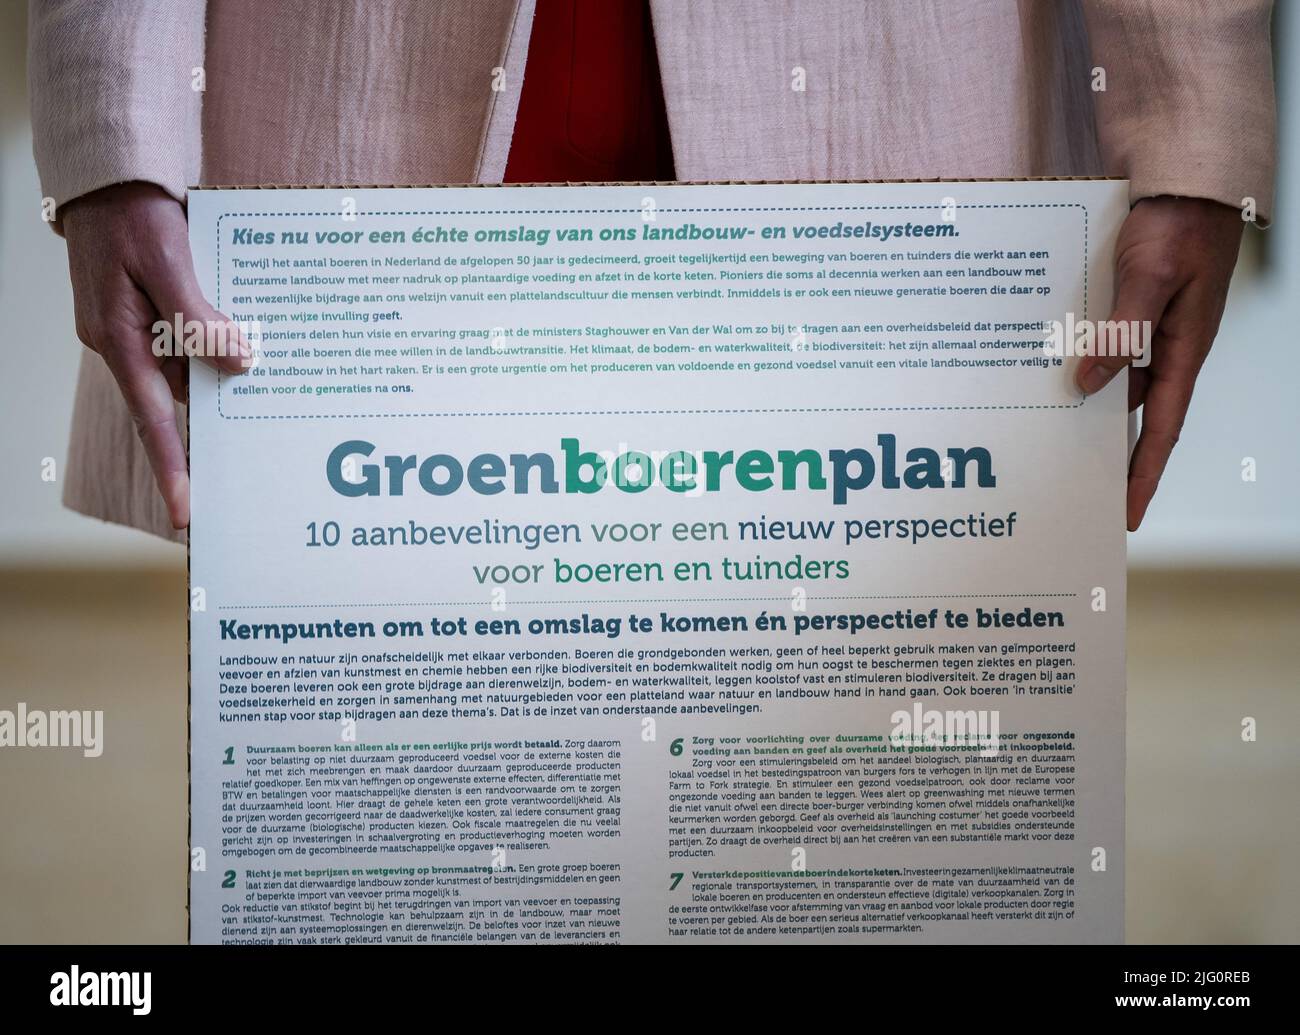 2022-07-06 16:41:05 THE HAGUE - Ministers Christianne van der Wal (Nature and Nitrogen) and Henk Staghouwer (Agriculture, Nature and Food Quality) receive the Green Farmers Plan. Thousands of farmers have designed the plan as a nature-friendly response to the nitrogen problem. They believe that food production can go hand in hand with the provision of social services such as biodiversity and healthy nutrition. ANP BART MAAT netherlands out - belgium out Stock Photo